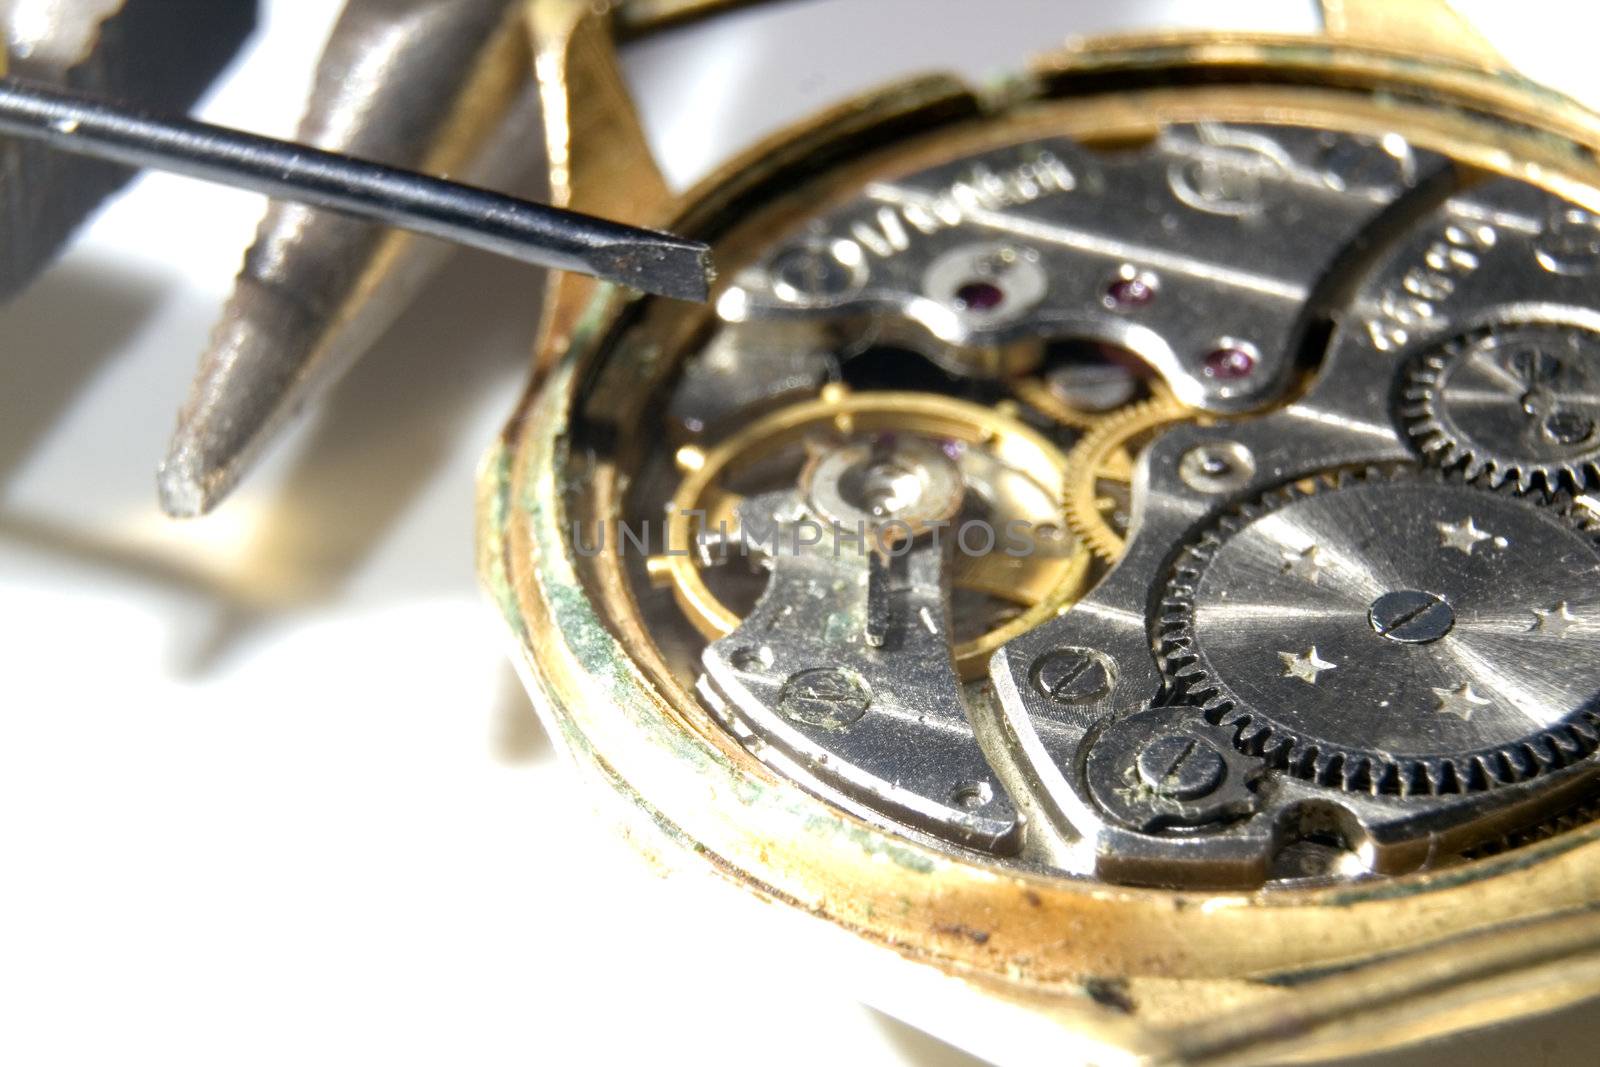 The mechanism of old watches on white background